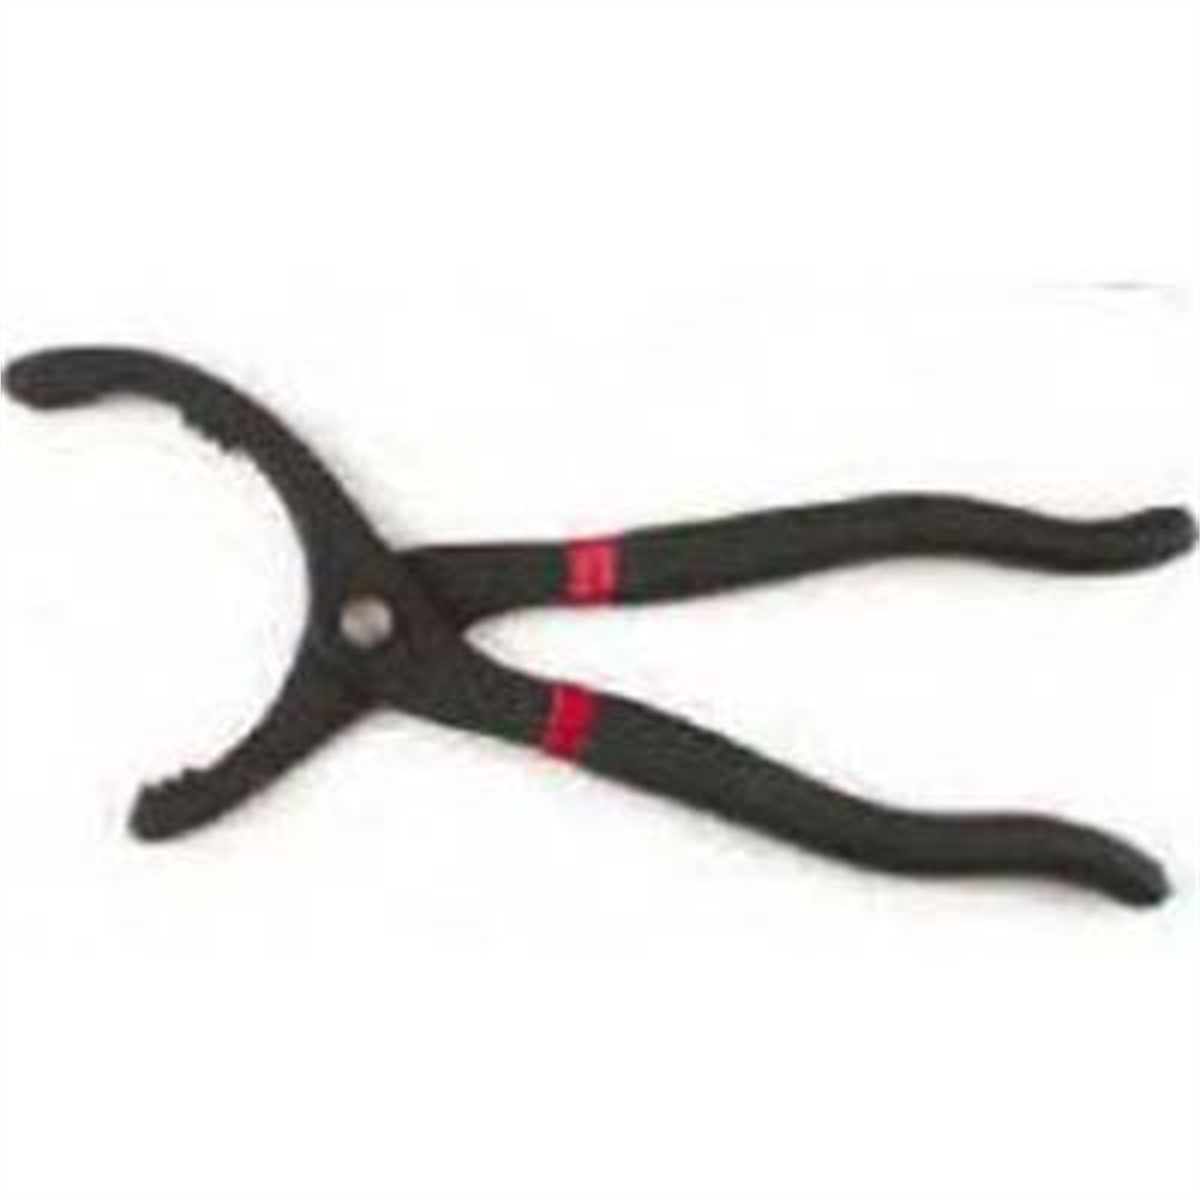 2-11/16" to 3-3/4" Oil Filter Wrench Pliers